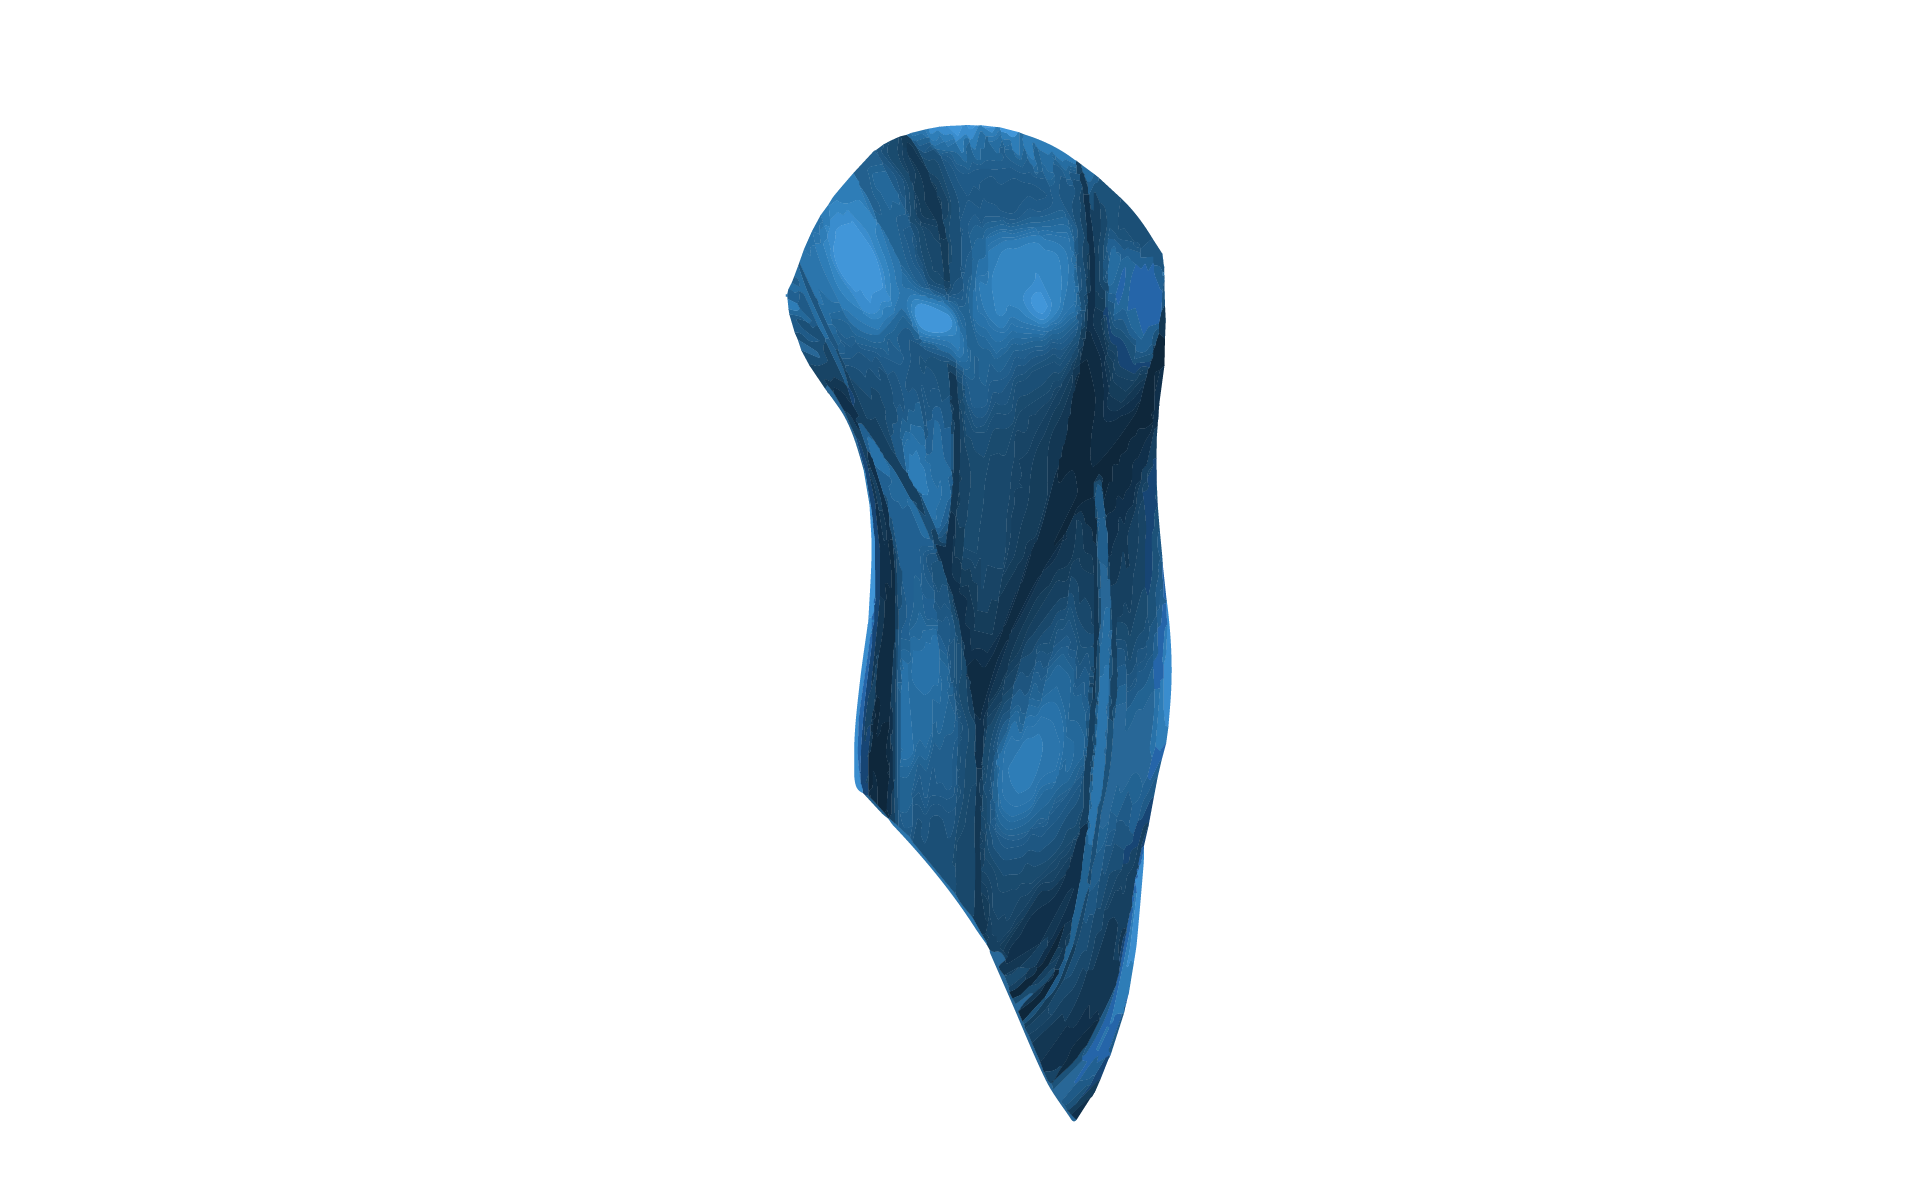 A 3D graphic image of the human muscle